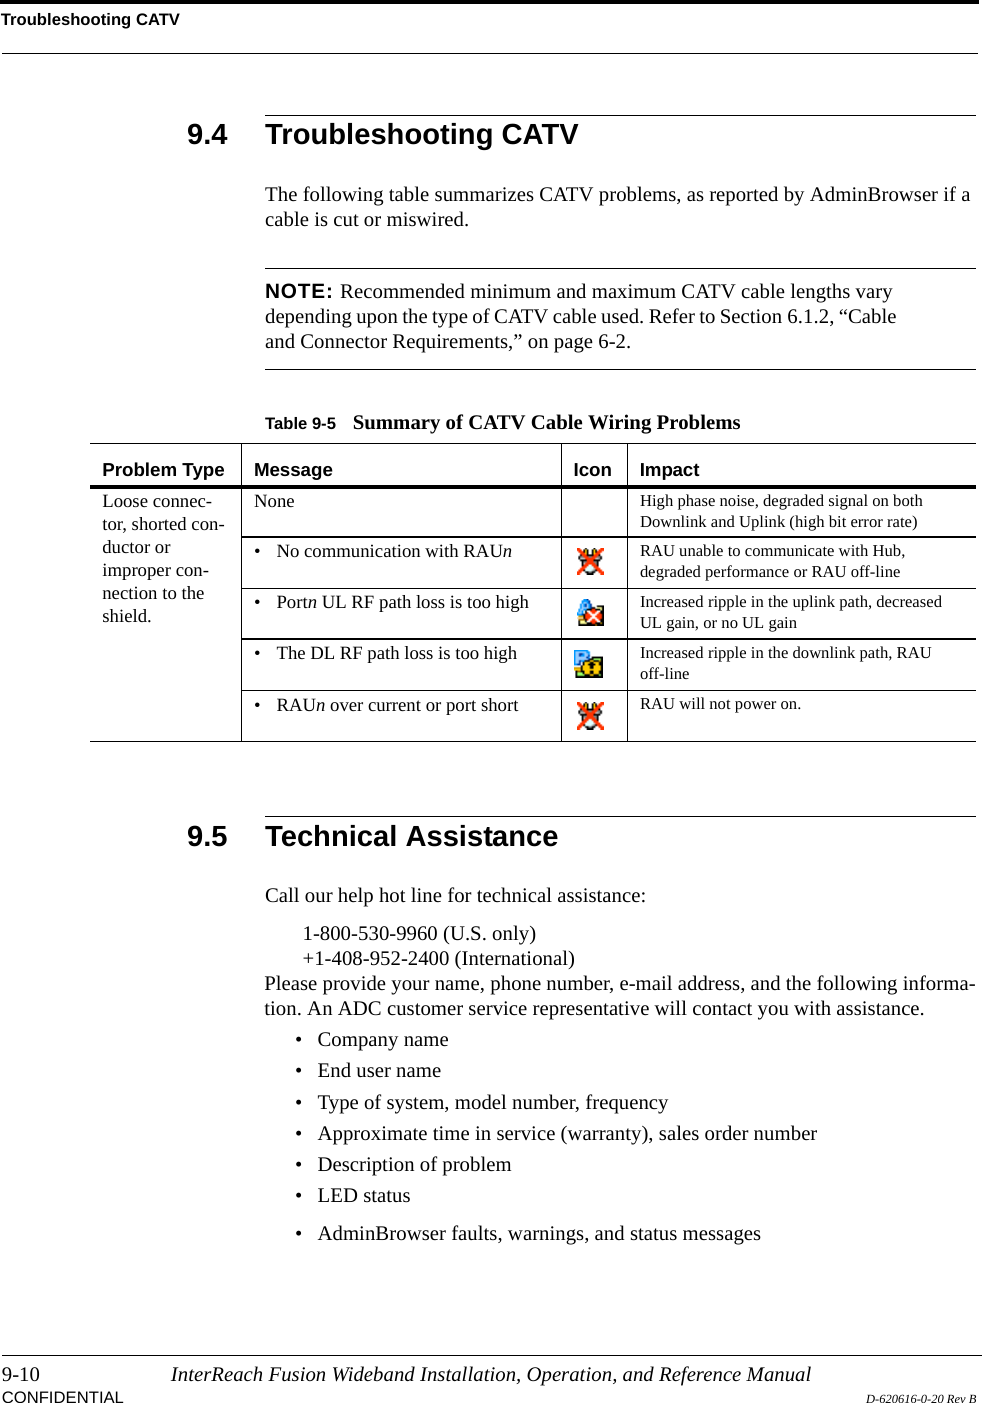 Troubleshooting CATV9-10 InterReach Fusion Wideband Installation, Operation, and Reference ManualCONFIDENTIAL D-620616-0-20 Rev B9.4 Troubleshooting CATVThe following table summarizes CATV problems, as reported by AdminBrowser if a cable is cut or miswired.NOTE: Recommended minimum and maximum CATV cable lengths vary depending upon the type of CATV cable used. Refer to Section 6.1.2, “Cable and Connector Requirements,” on page 6-2.9.5 Technical AssistanceCall our help hot line for technical assistance:1-800-530-9960 (U.S. only)+1-408-952-2400 (International)Please provide your name, phone number, e-mail address, and the following informa-tion. An ADC customer service representative will contact you with assistance.• Company name• End user name• Type of system, model number, frequency• Approximate time in service (warranty), sales order number• Description of problem• LED status• AdminBrowser faults, warnings, and status messagesTable 9-5 Summary of CATV Cable Wiring ProblemsProblem Type Message Icon ImpactLoose connec-tor, shorted con-ductor or improper con-nection to the shield.None High phase noise, degraded signal on both Downlink and Uplink (high bit error rate)• No communication with RAUn  RAU unable to communicate with Hub, degraded performance or RAU off-line• Portn UL RF path loss is too high Increased ripple in the uplink path, decreased UL gain, or no UL gain• The DL RF path loss is too high Increased ripple in the downlink path, RAU off-line•RAUn over current or port short RAU will not power on.